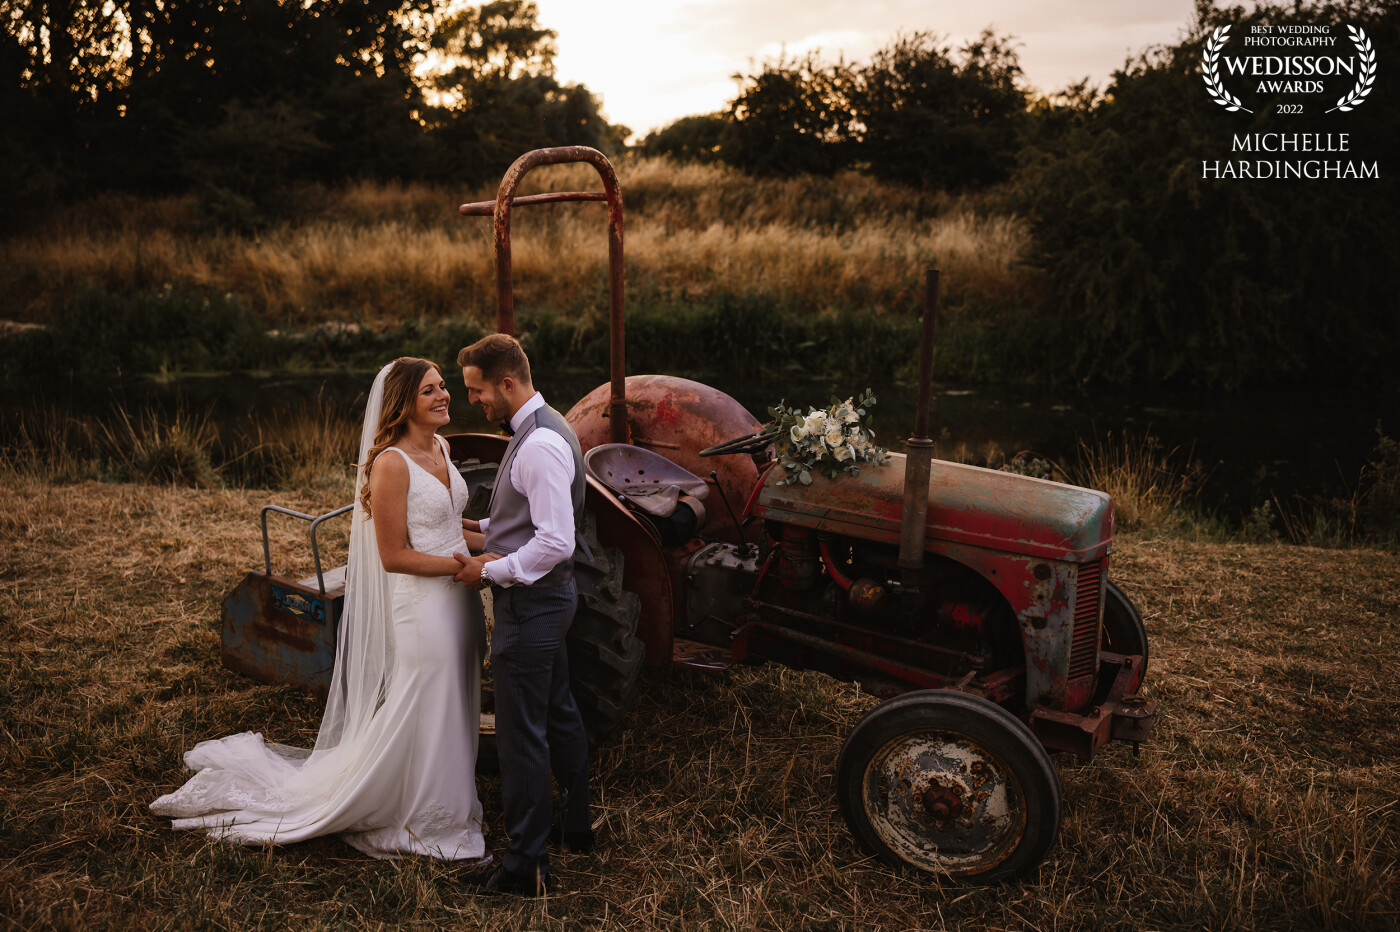 One of the most beautiful things about Sissons Barn is their old and classic tractor you get to ride on! Always a pleasure to head to the river for these golden hour shots.